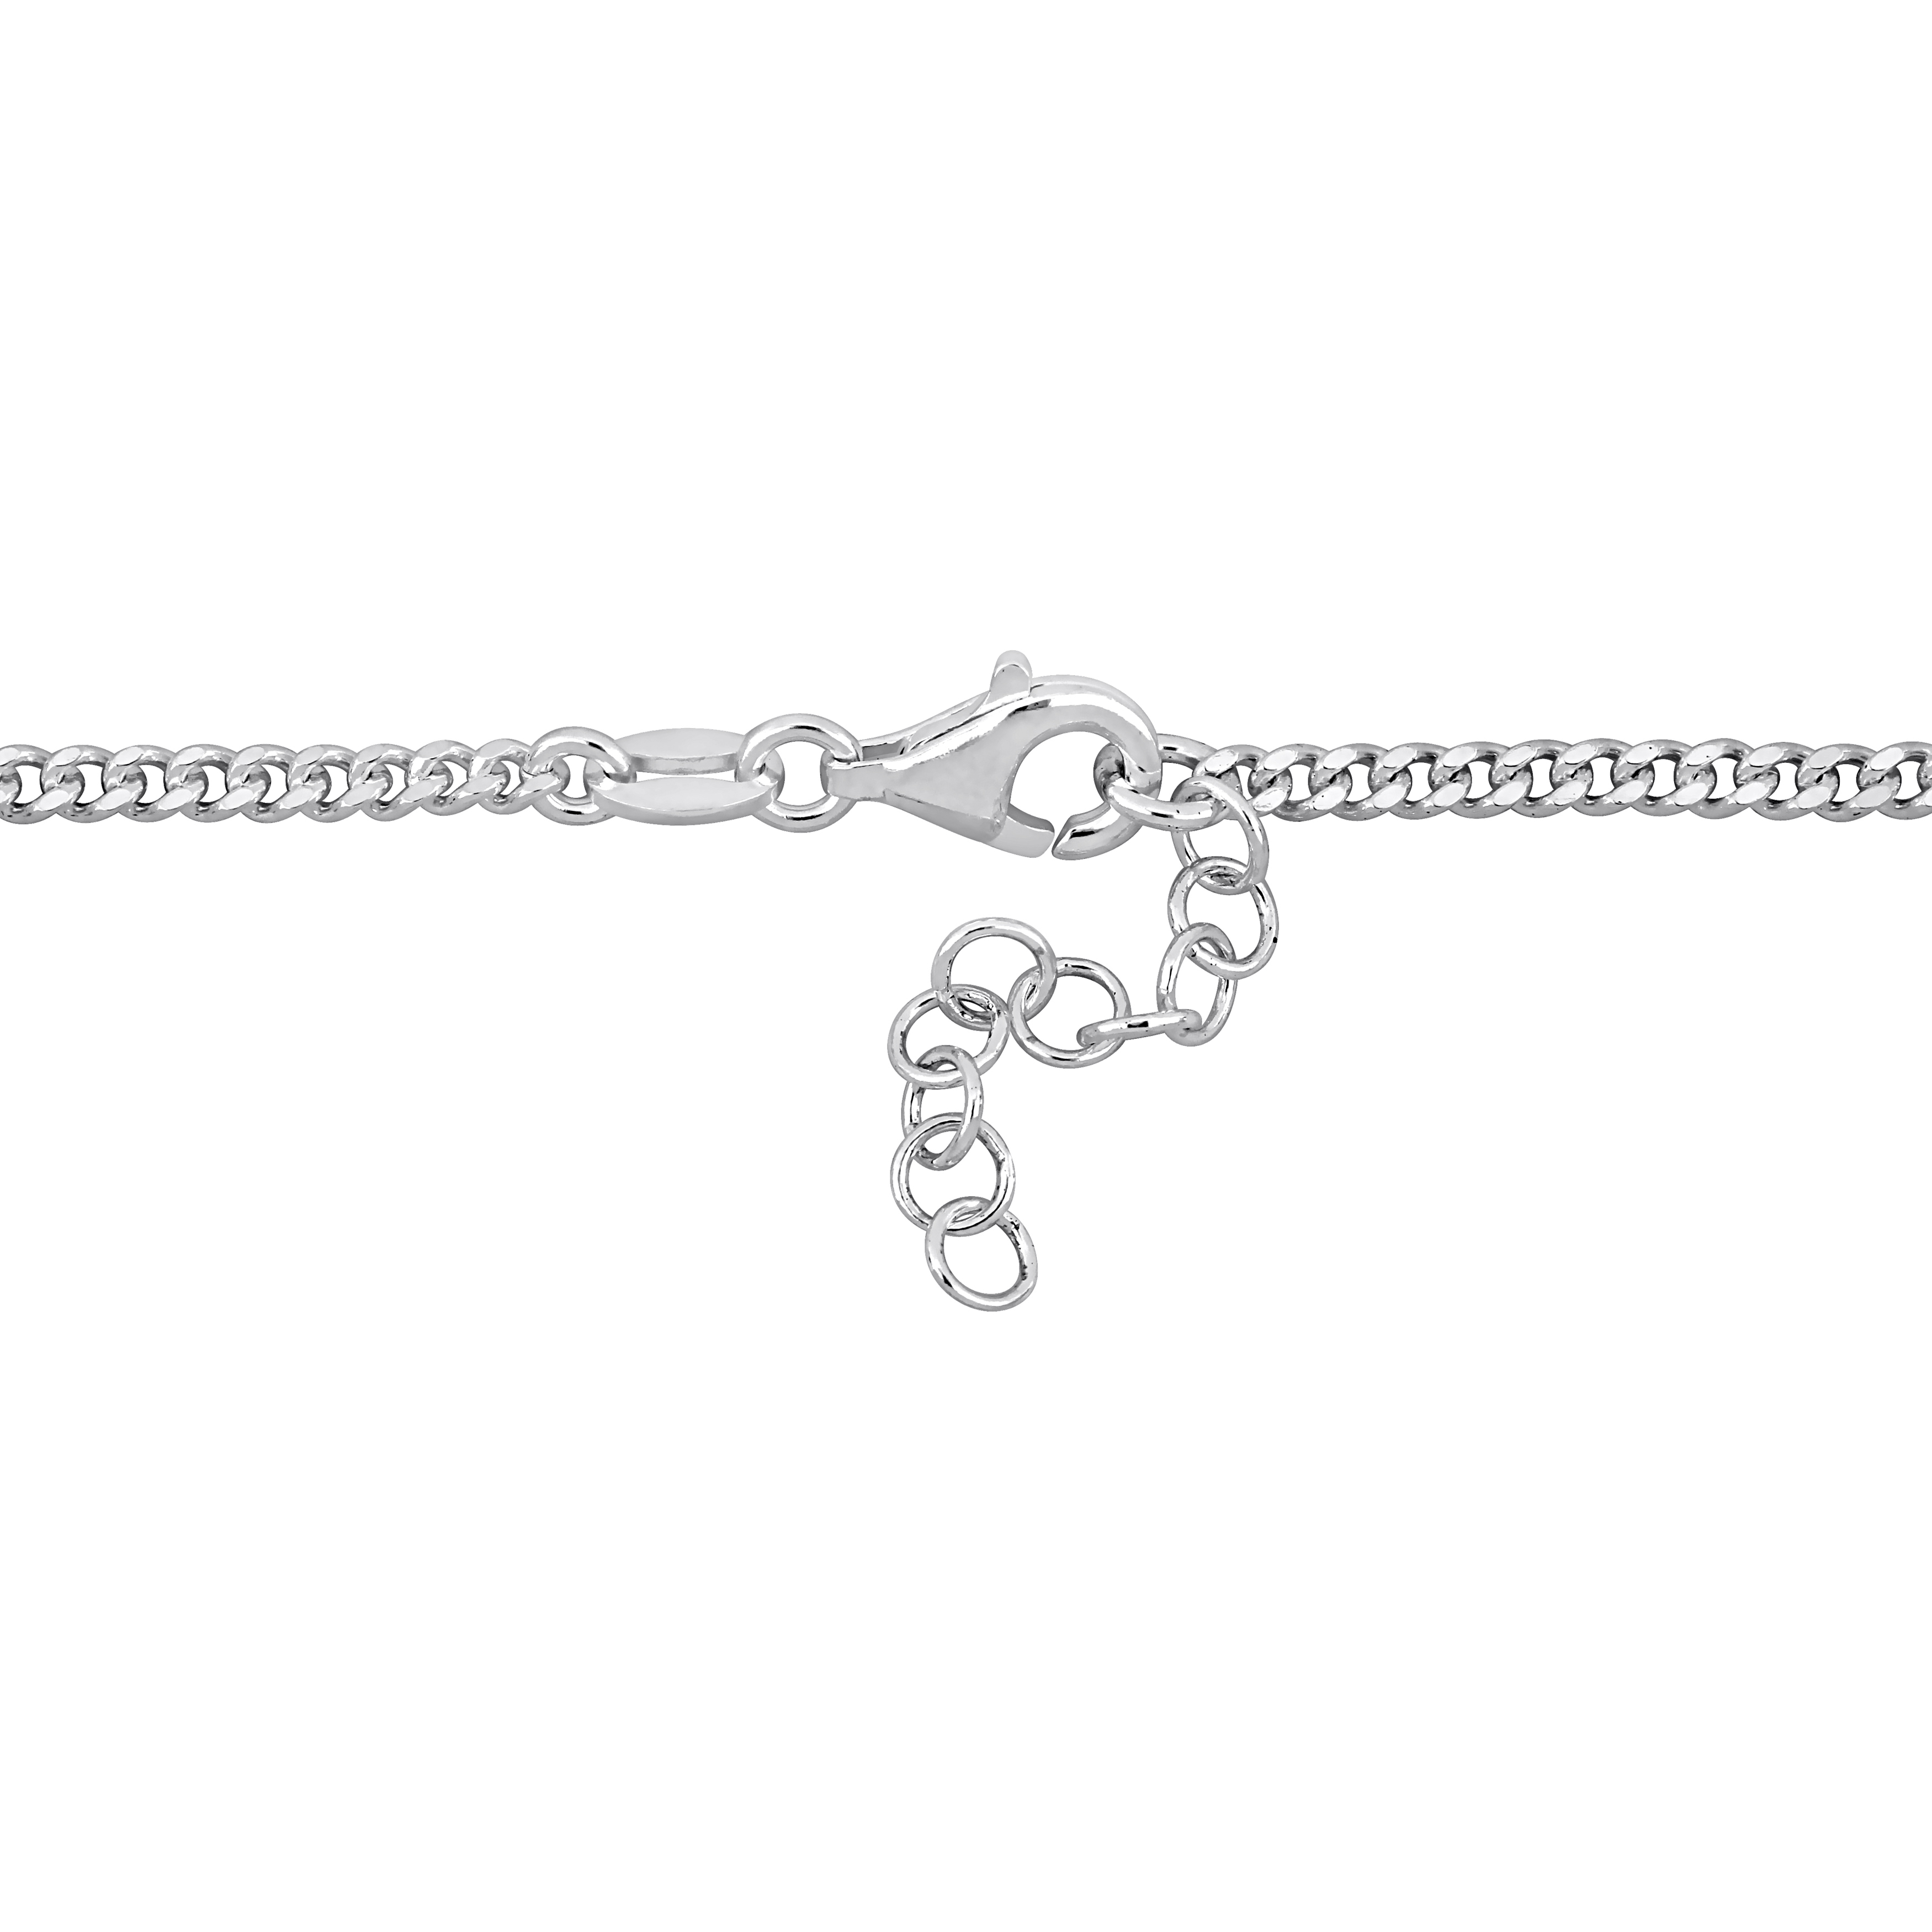 Lock and Key Charm Bracelet on 2mm CurbLink Chain in Sterling Silver - 6.5+1 in.